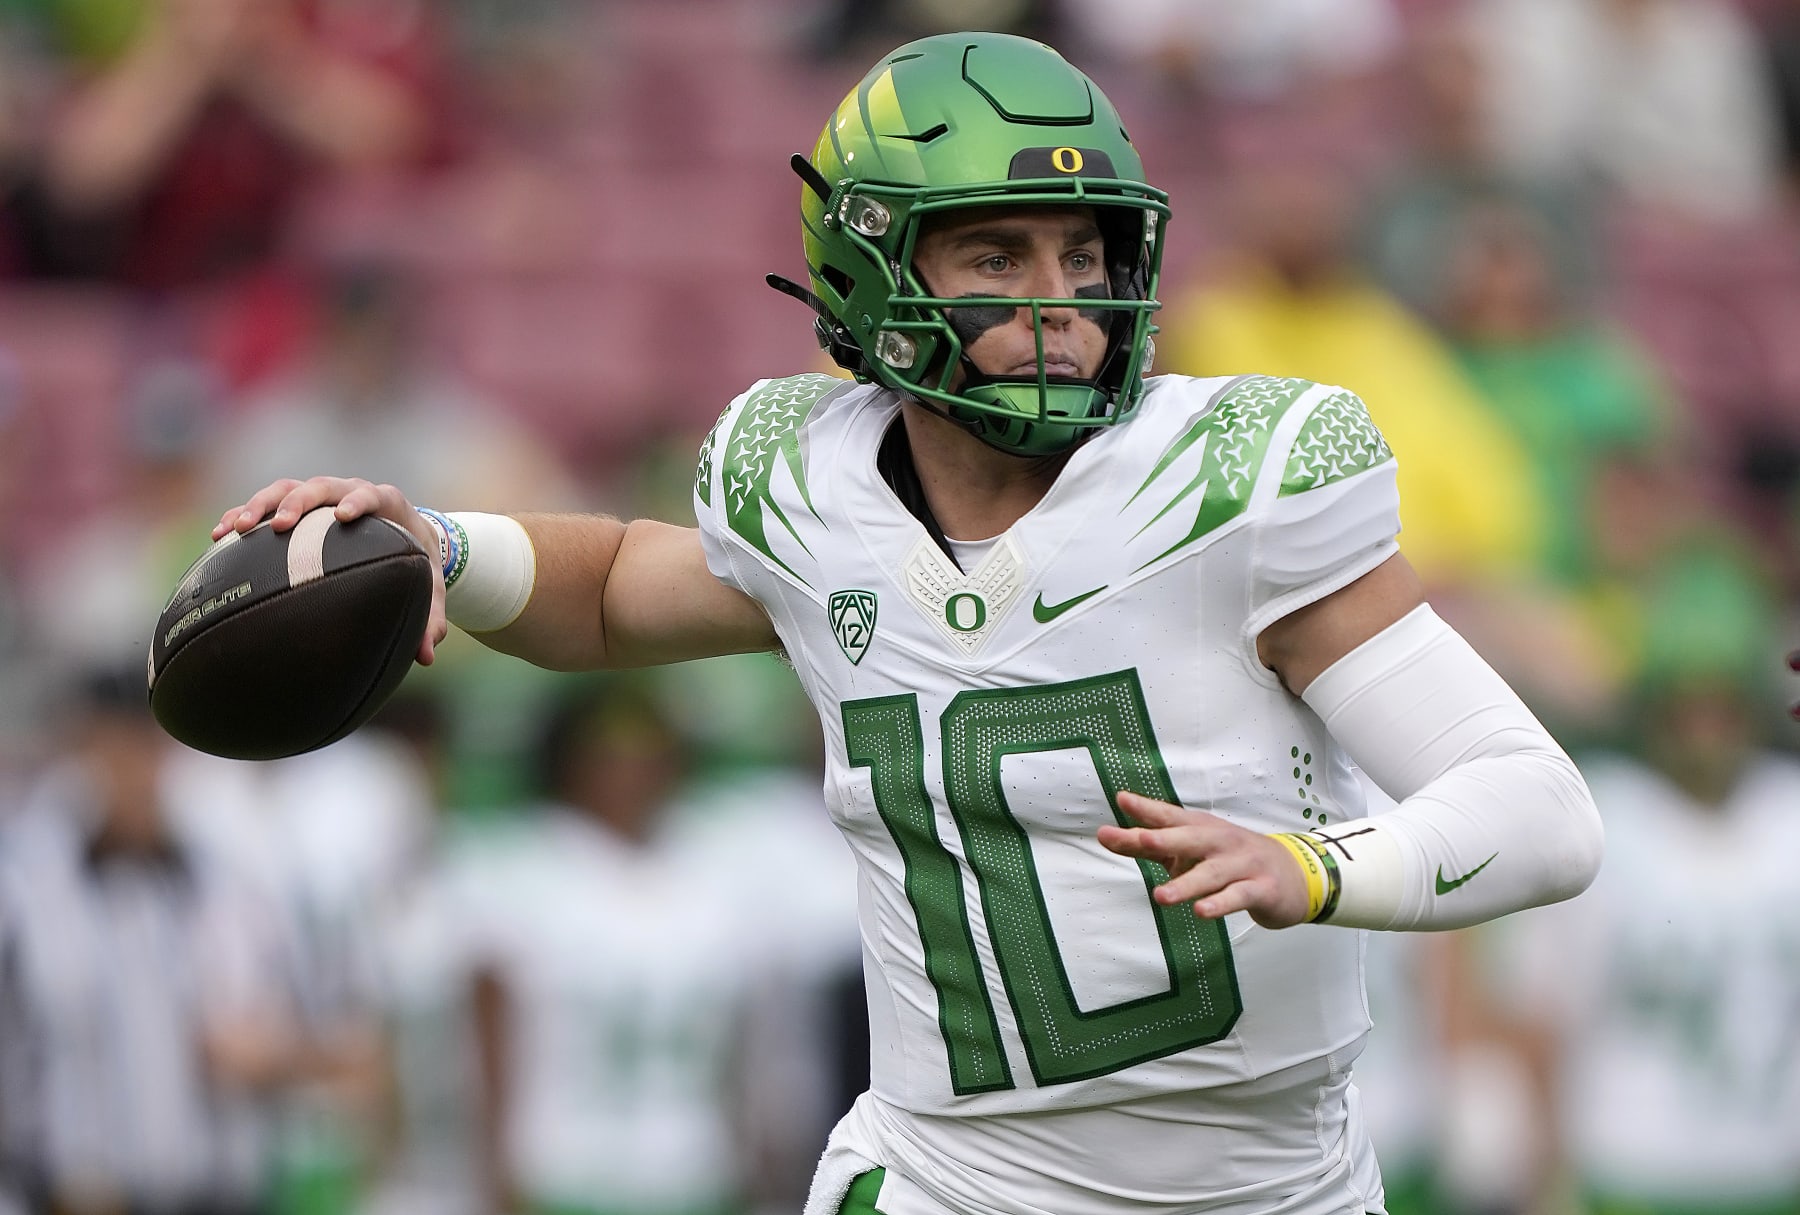 Bleacher Report dropped their CFB Quarterback Rankings after Week